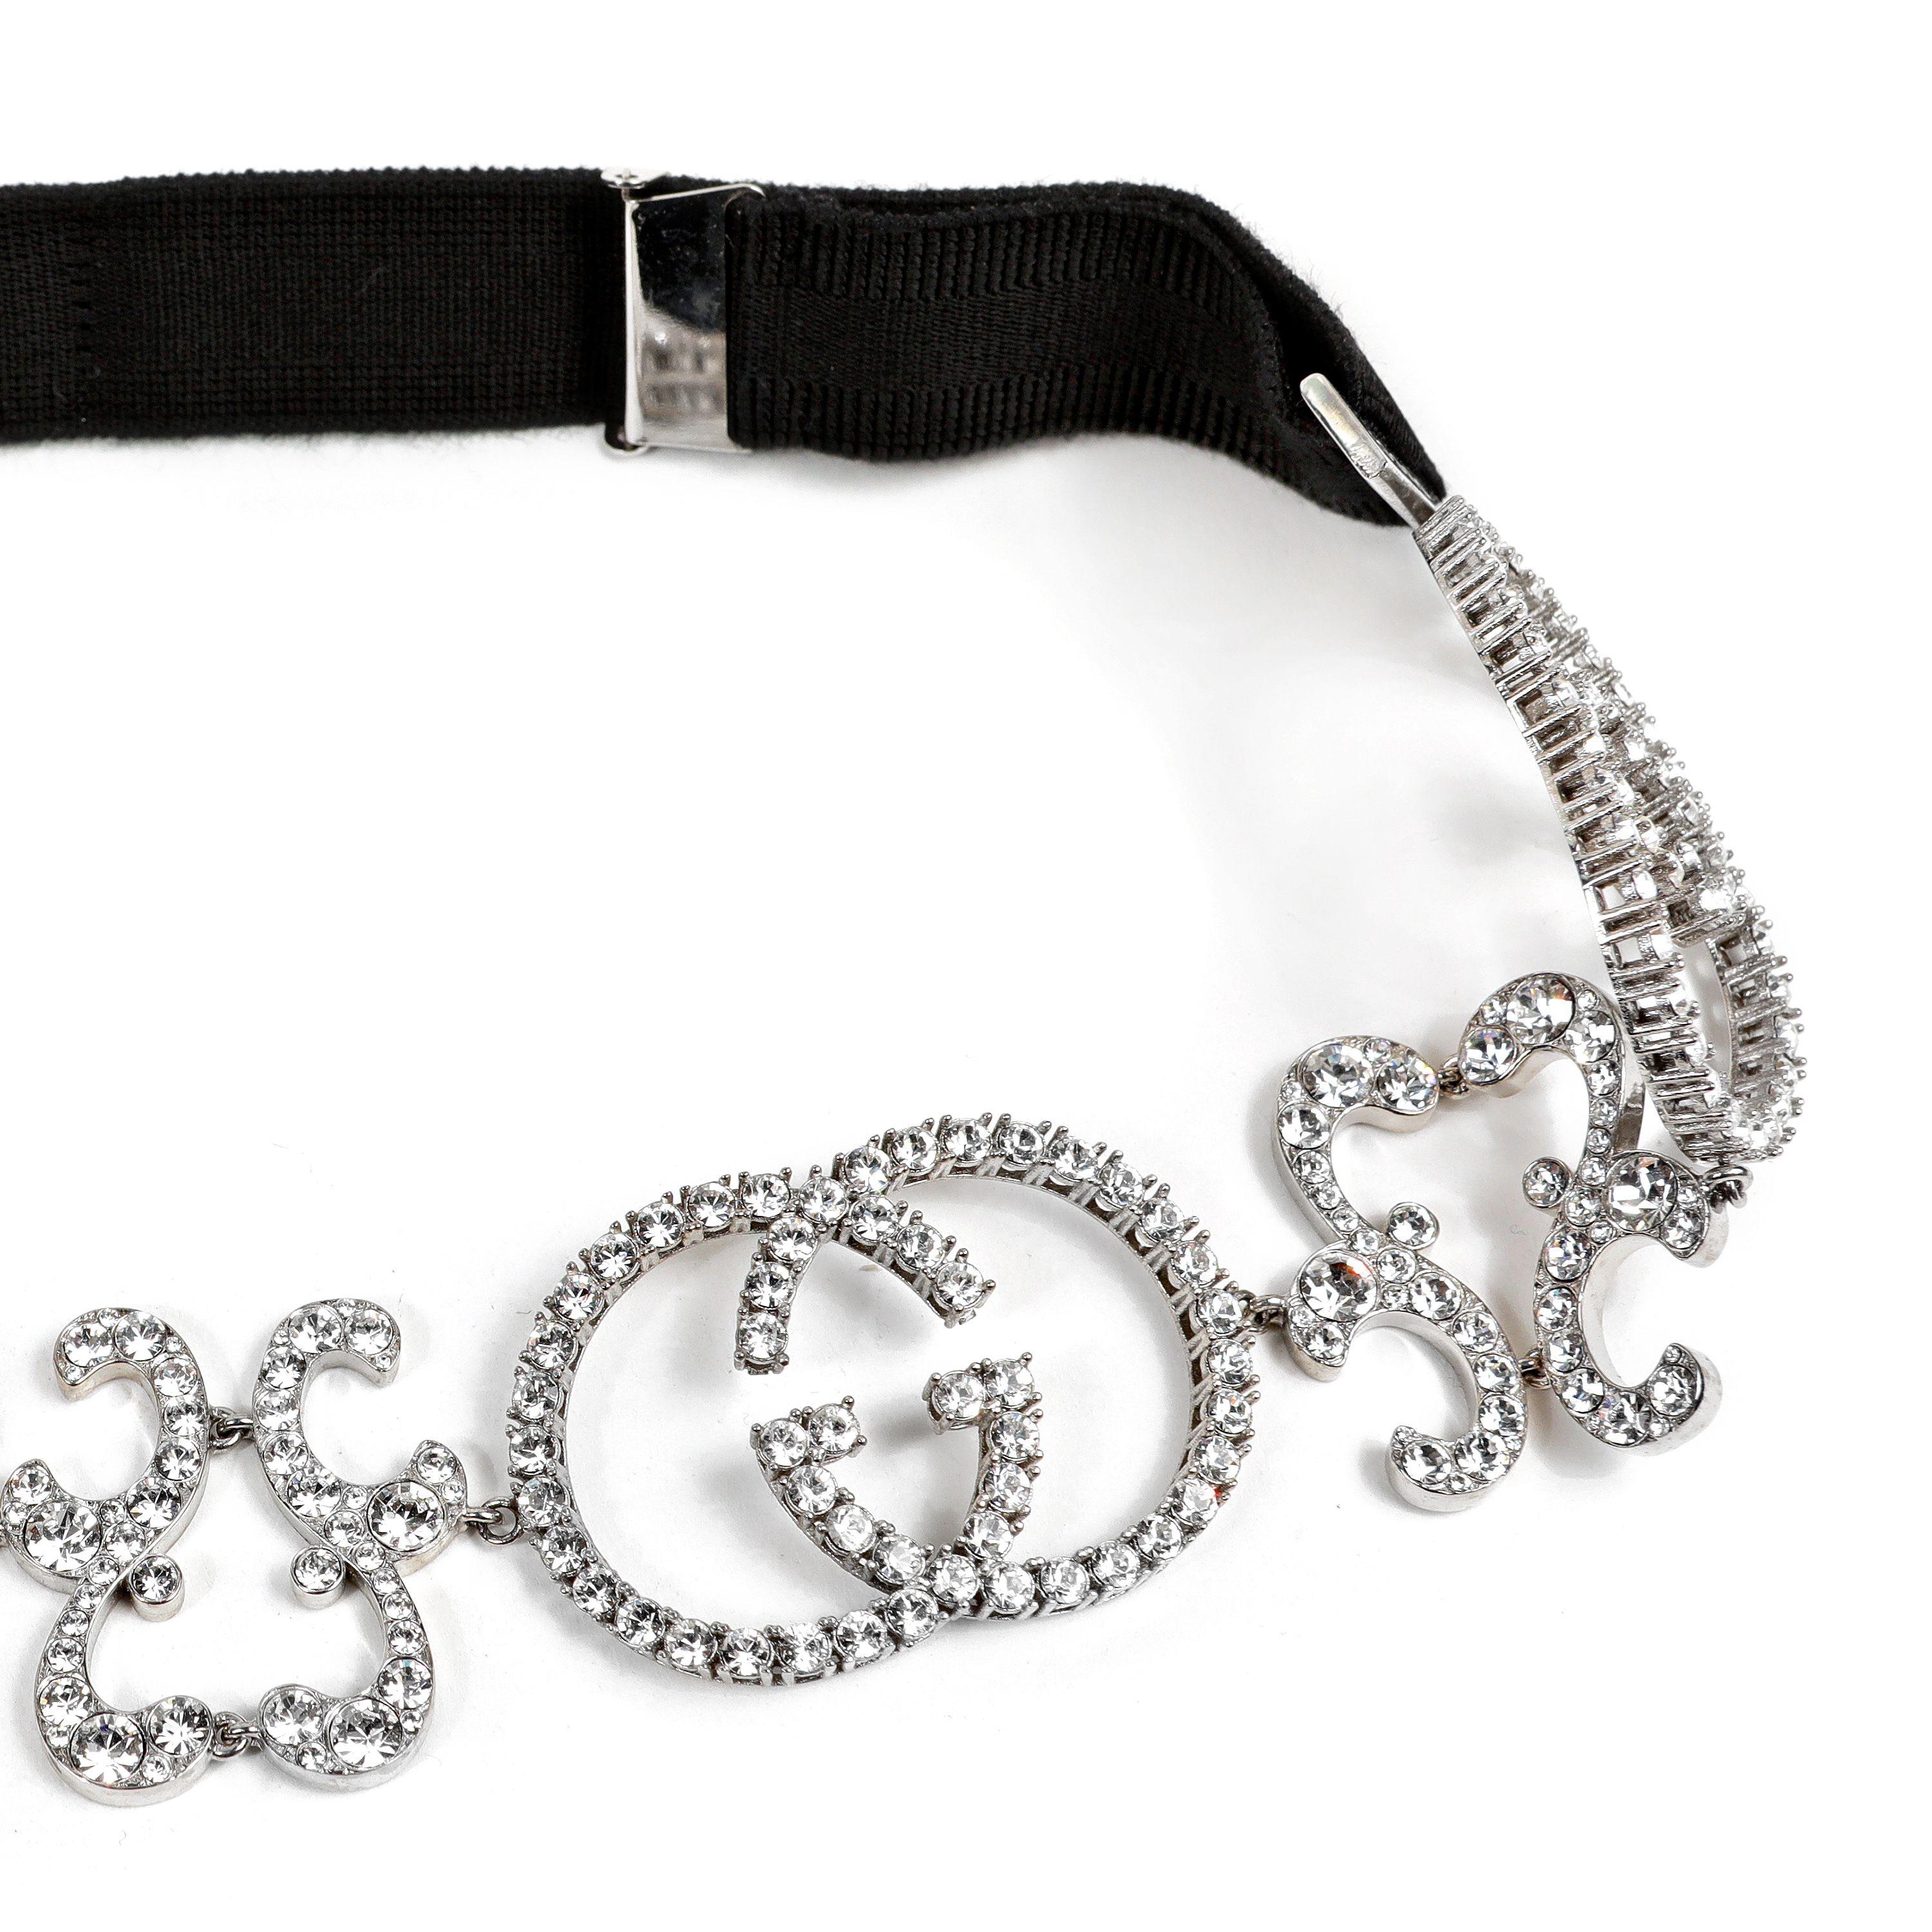 This authentic Gucci Crystal GG Headband is in pristine condition.  Black adjustable length band with intricate GG crystal design attachment.  
PBF 13805
